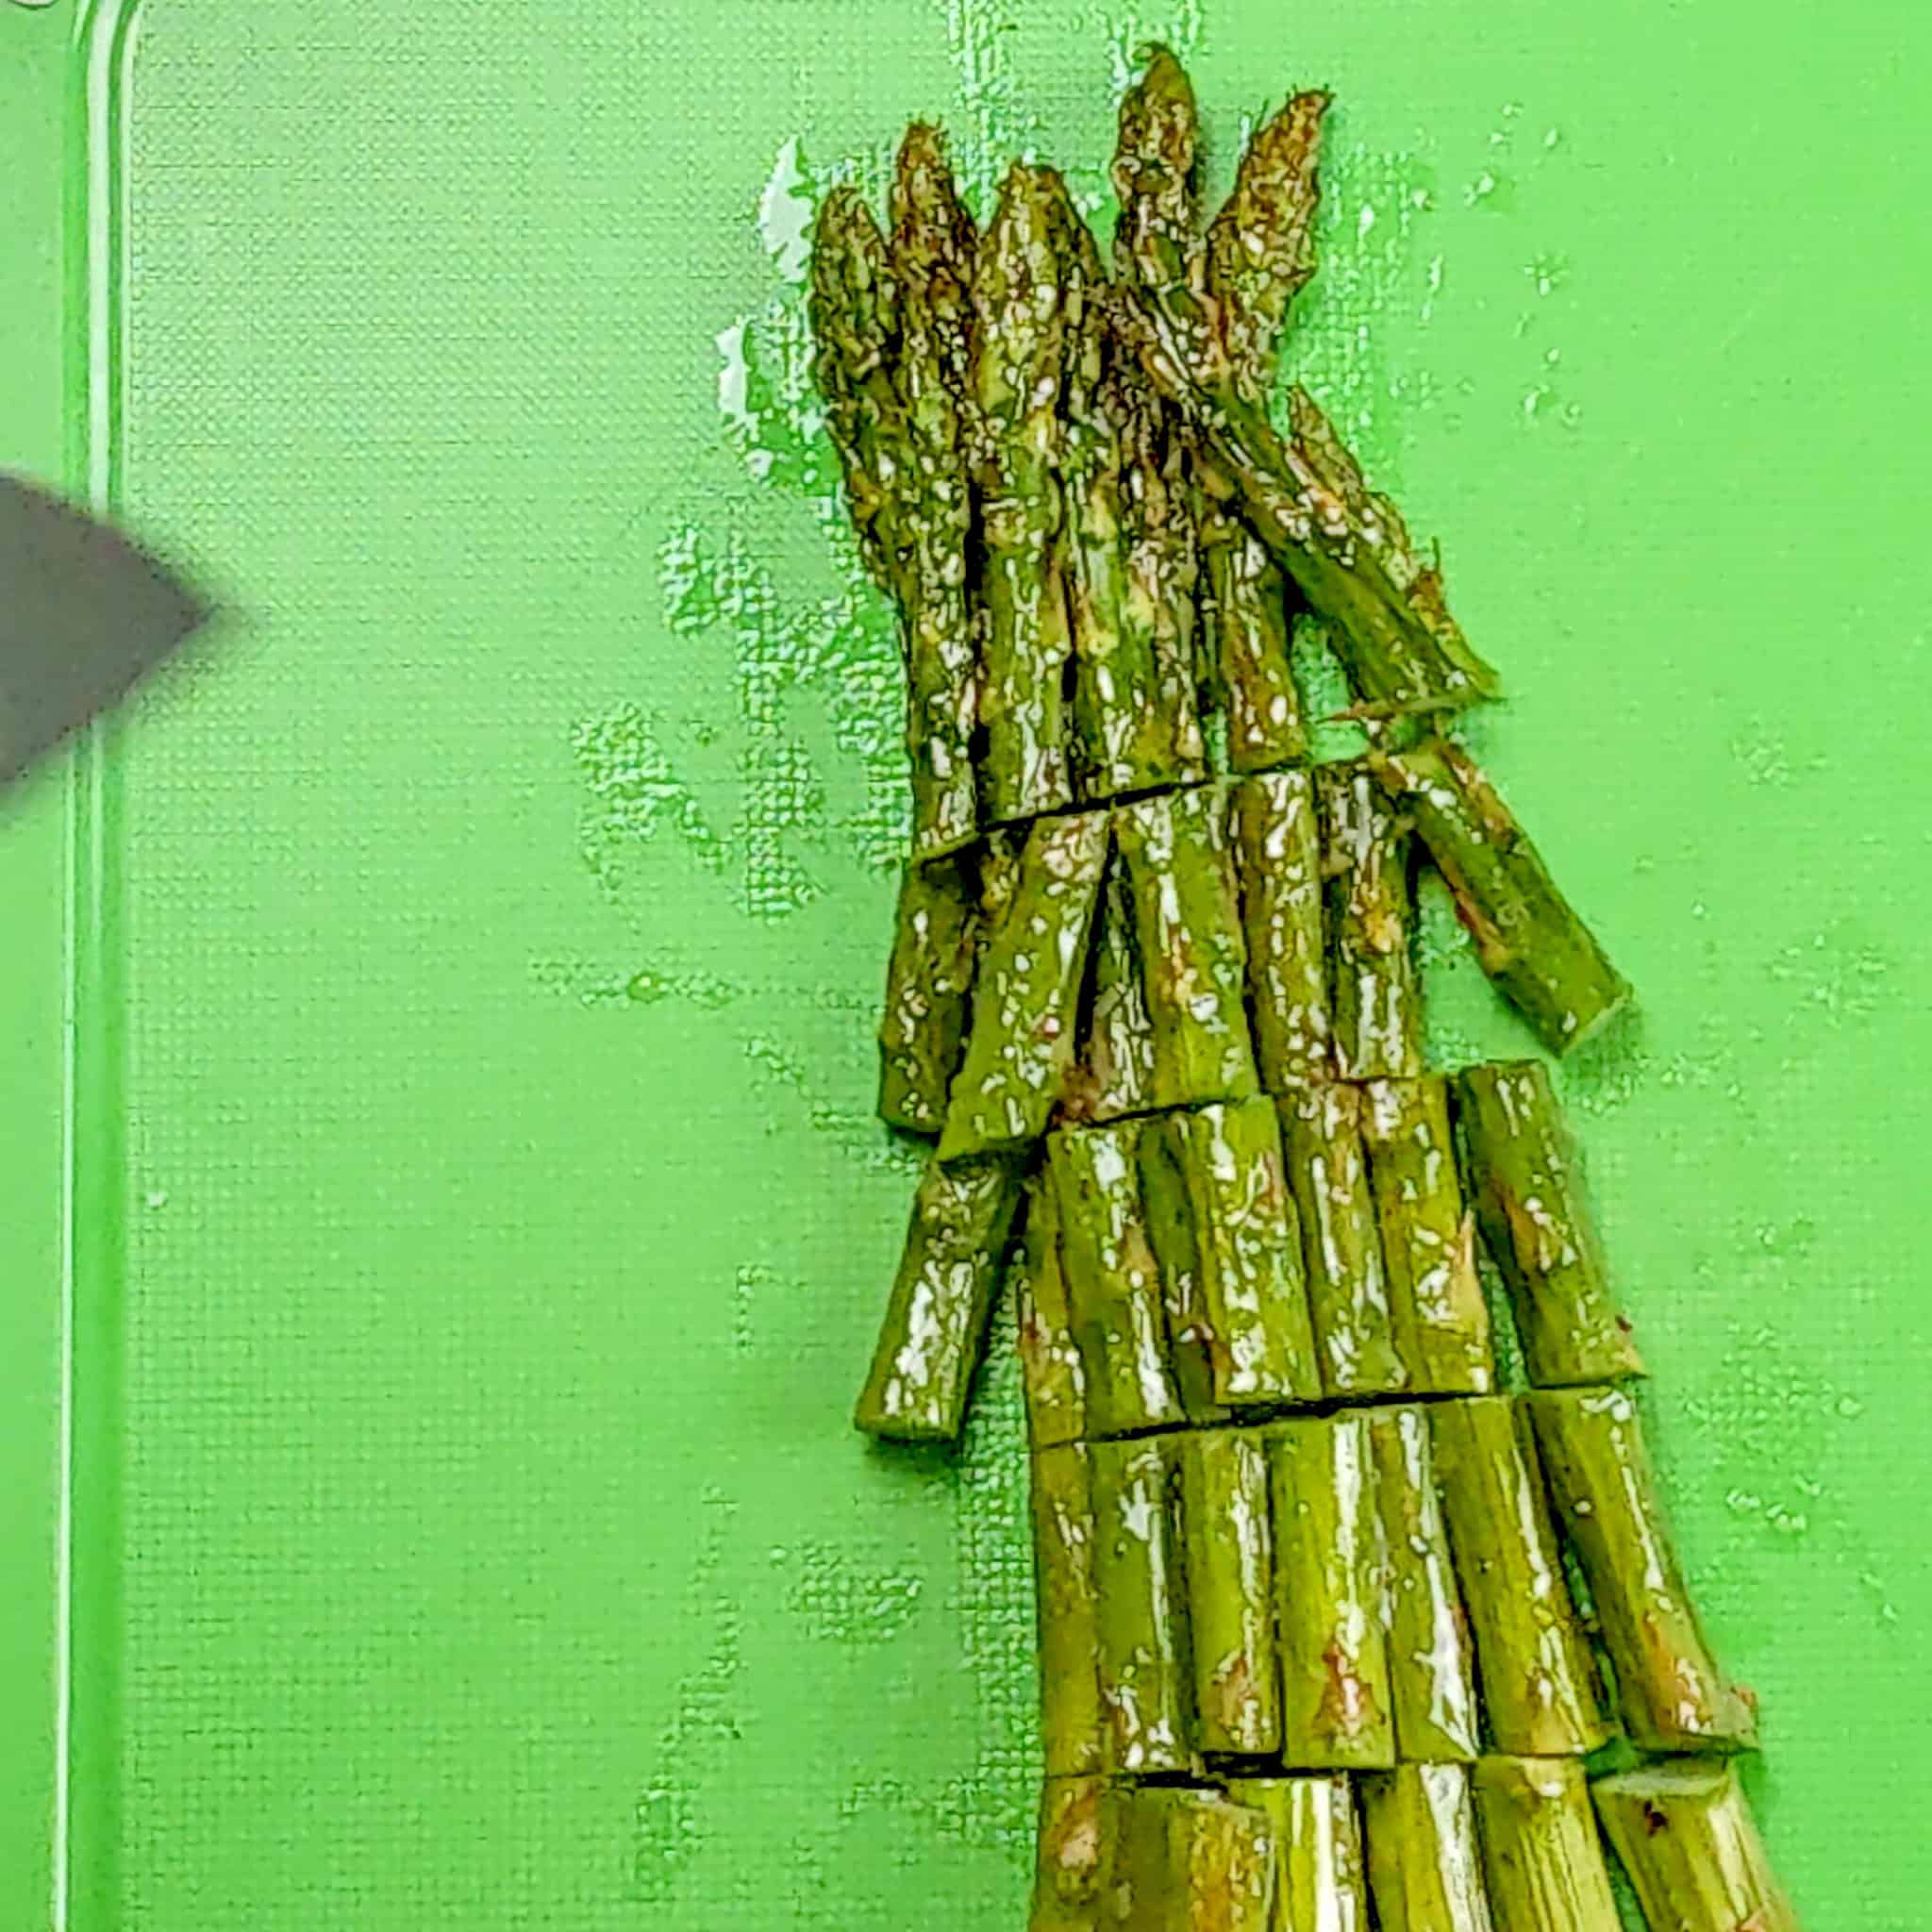 baked asparagus cut into 1-inch pieces on a plastic cutting board.